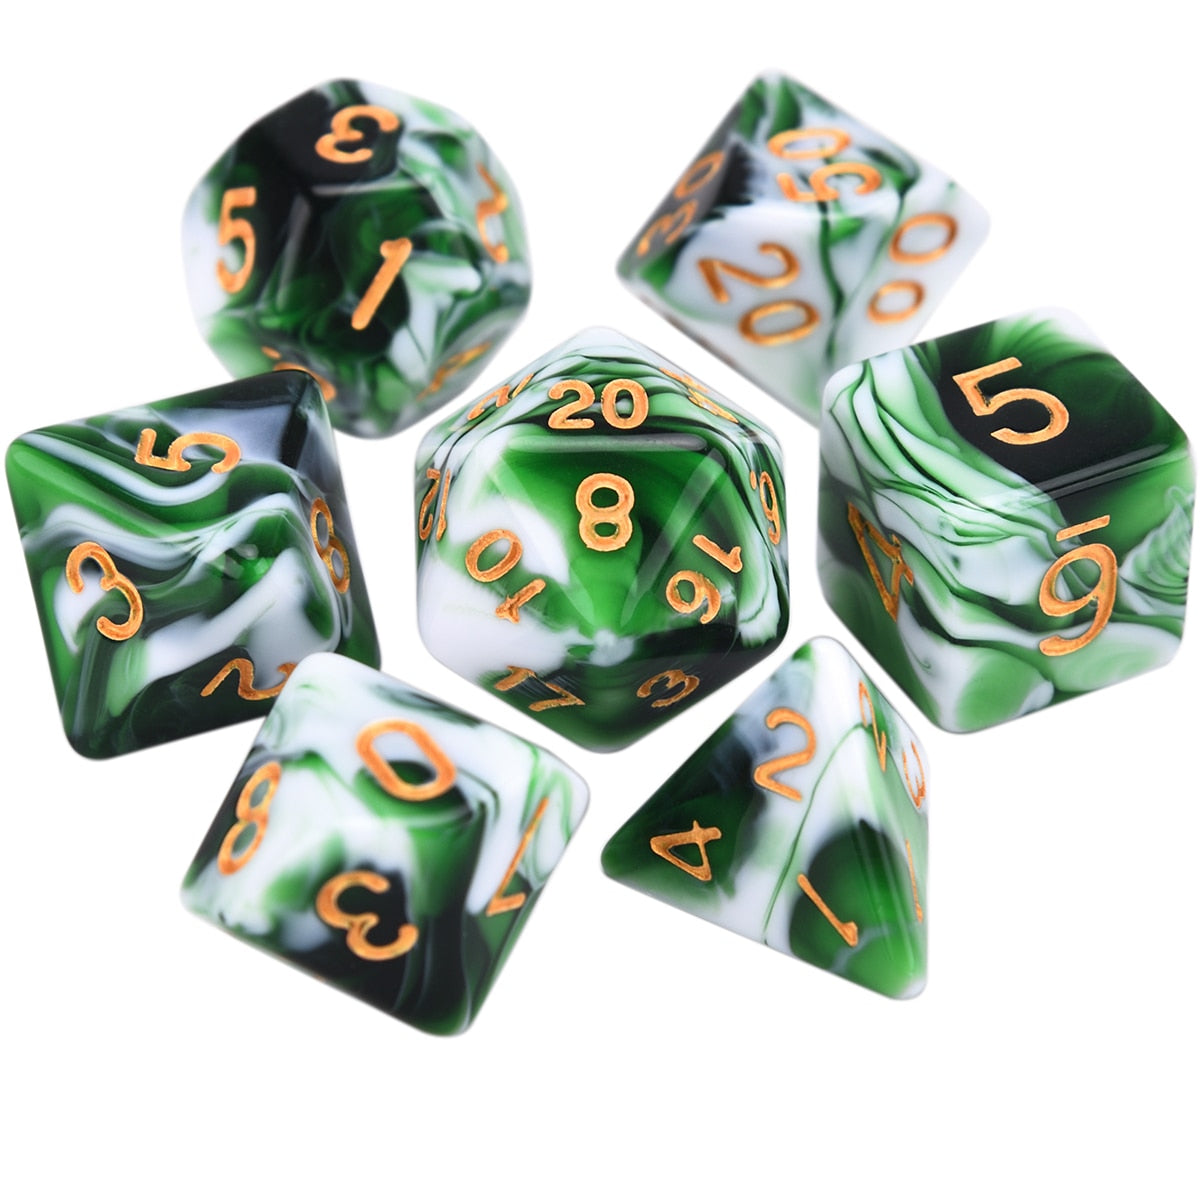 Marble sets